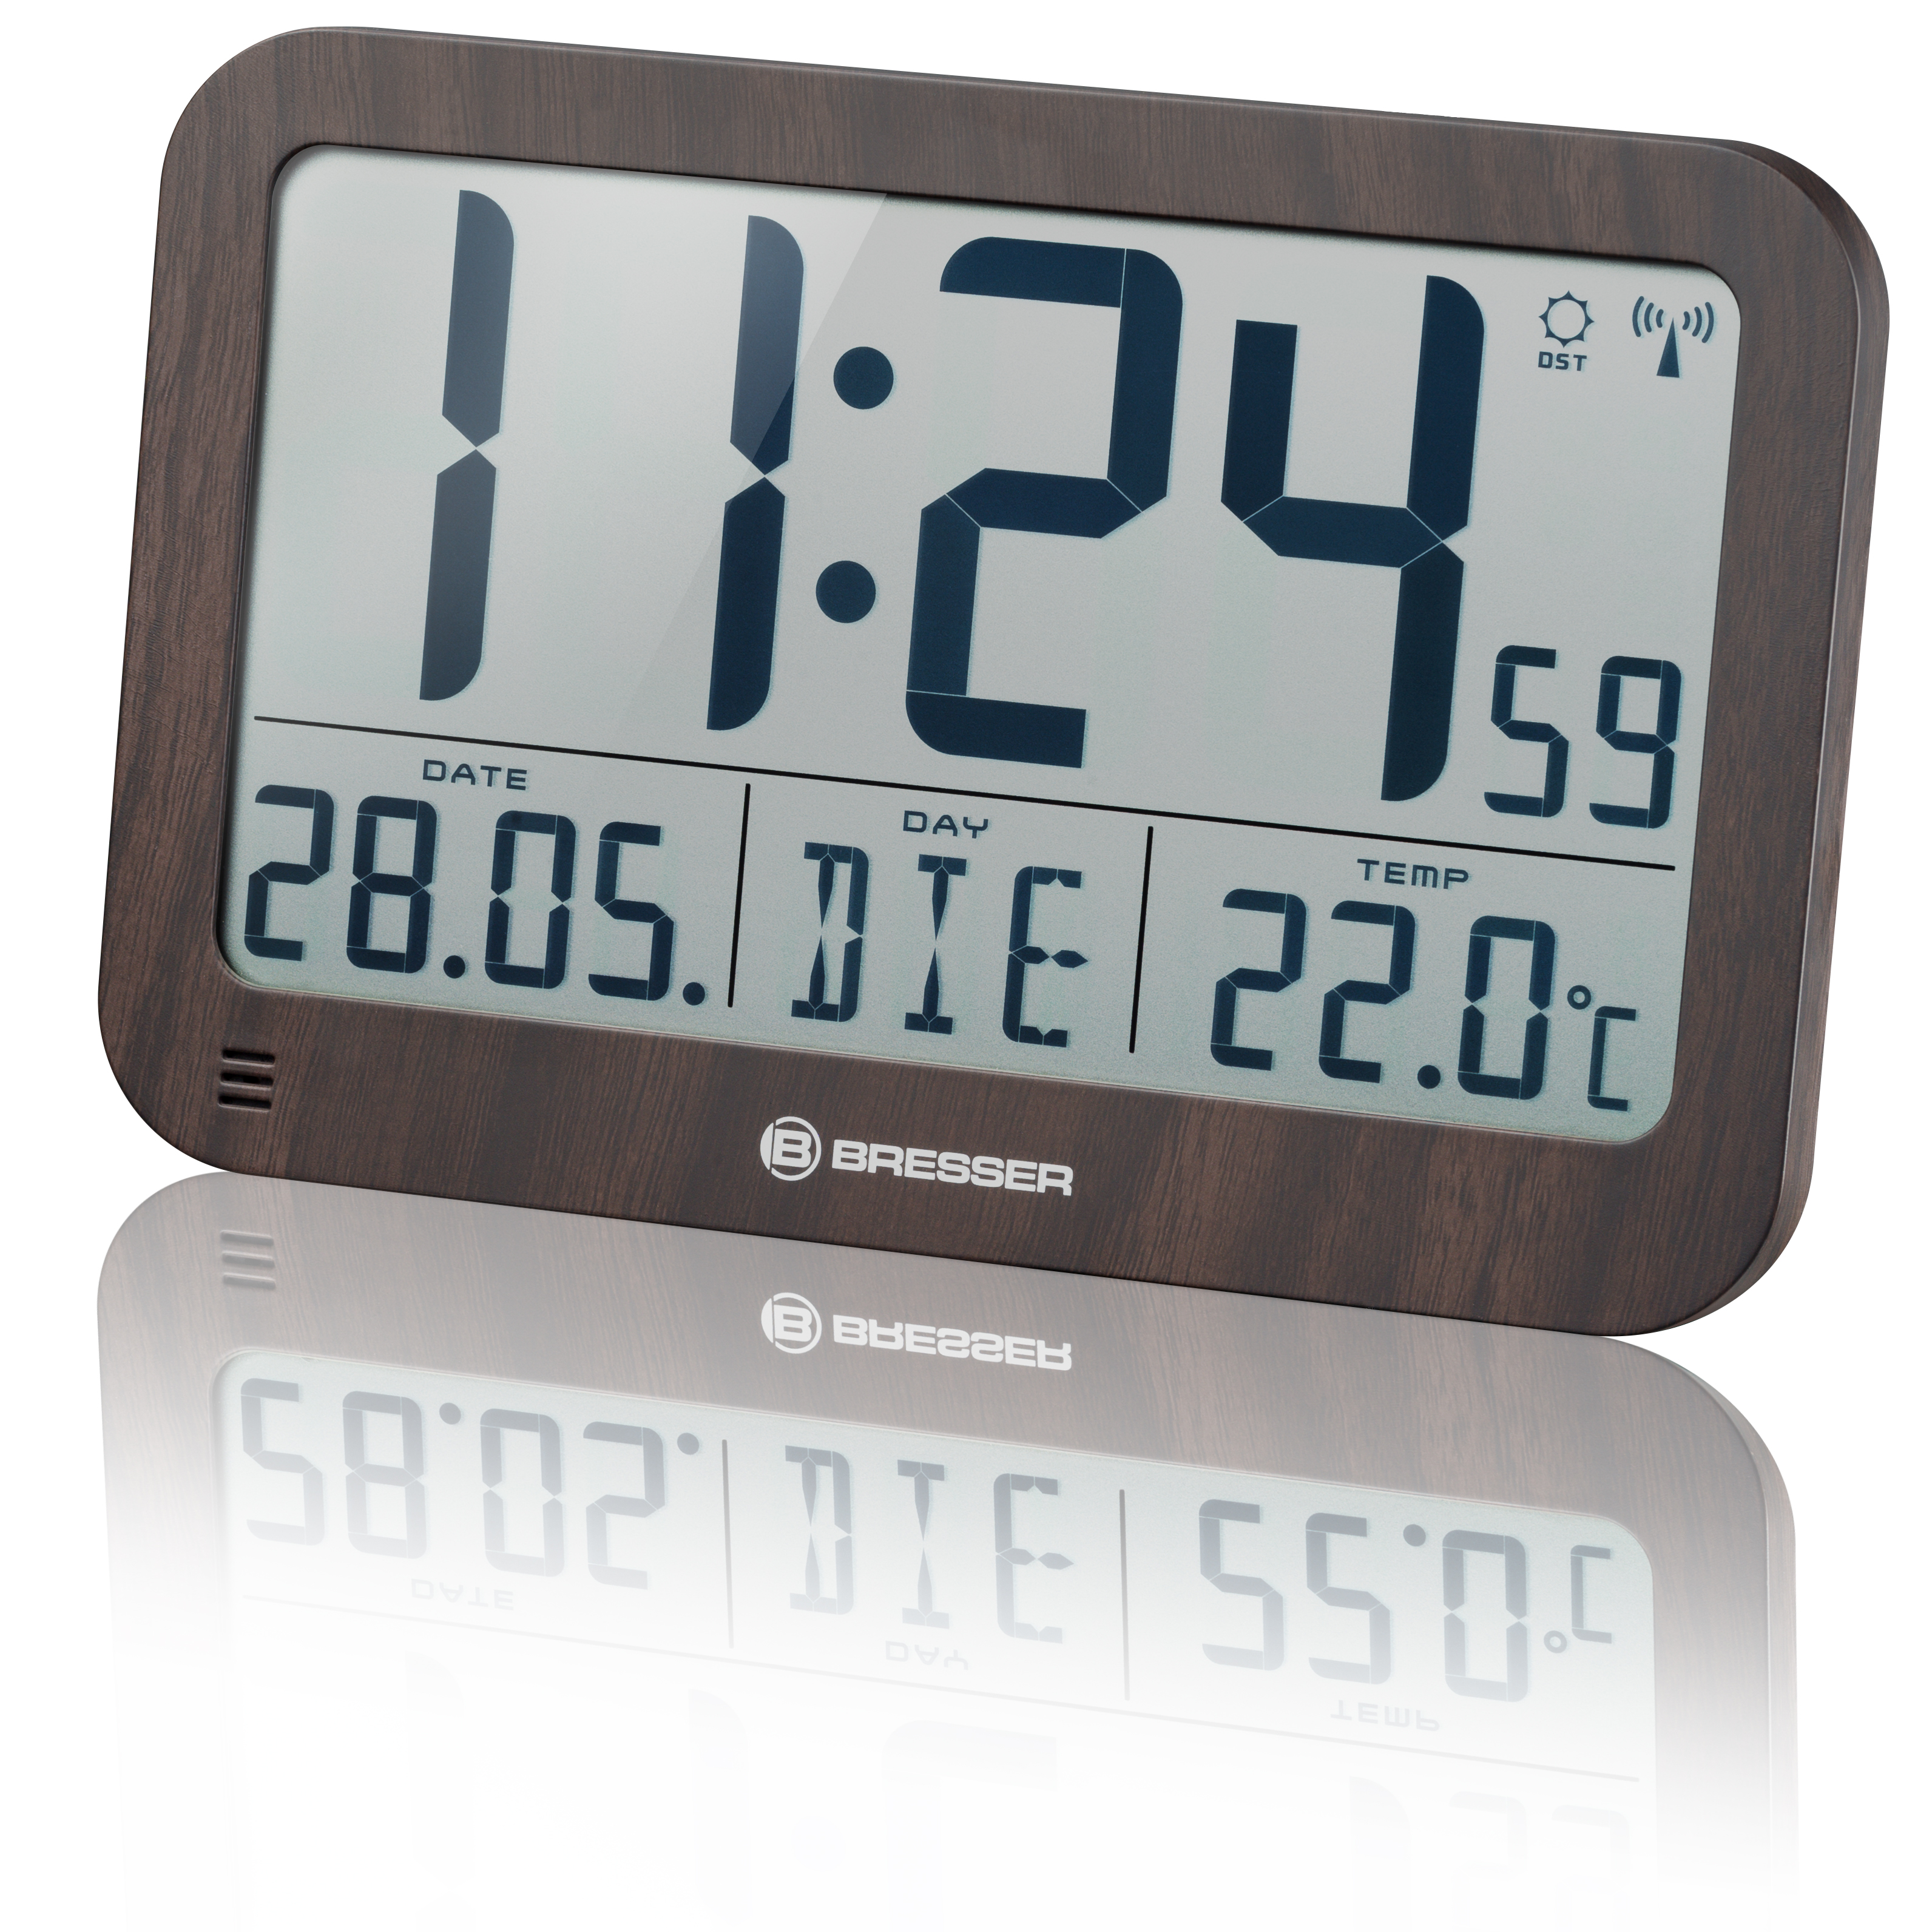 BRESSER MyTime MC LCD Wall /Table Clock in wooden Design 225x150mm (Refurbished)